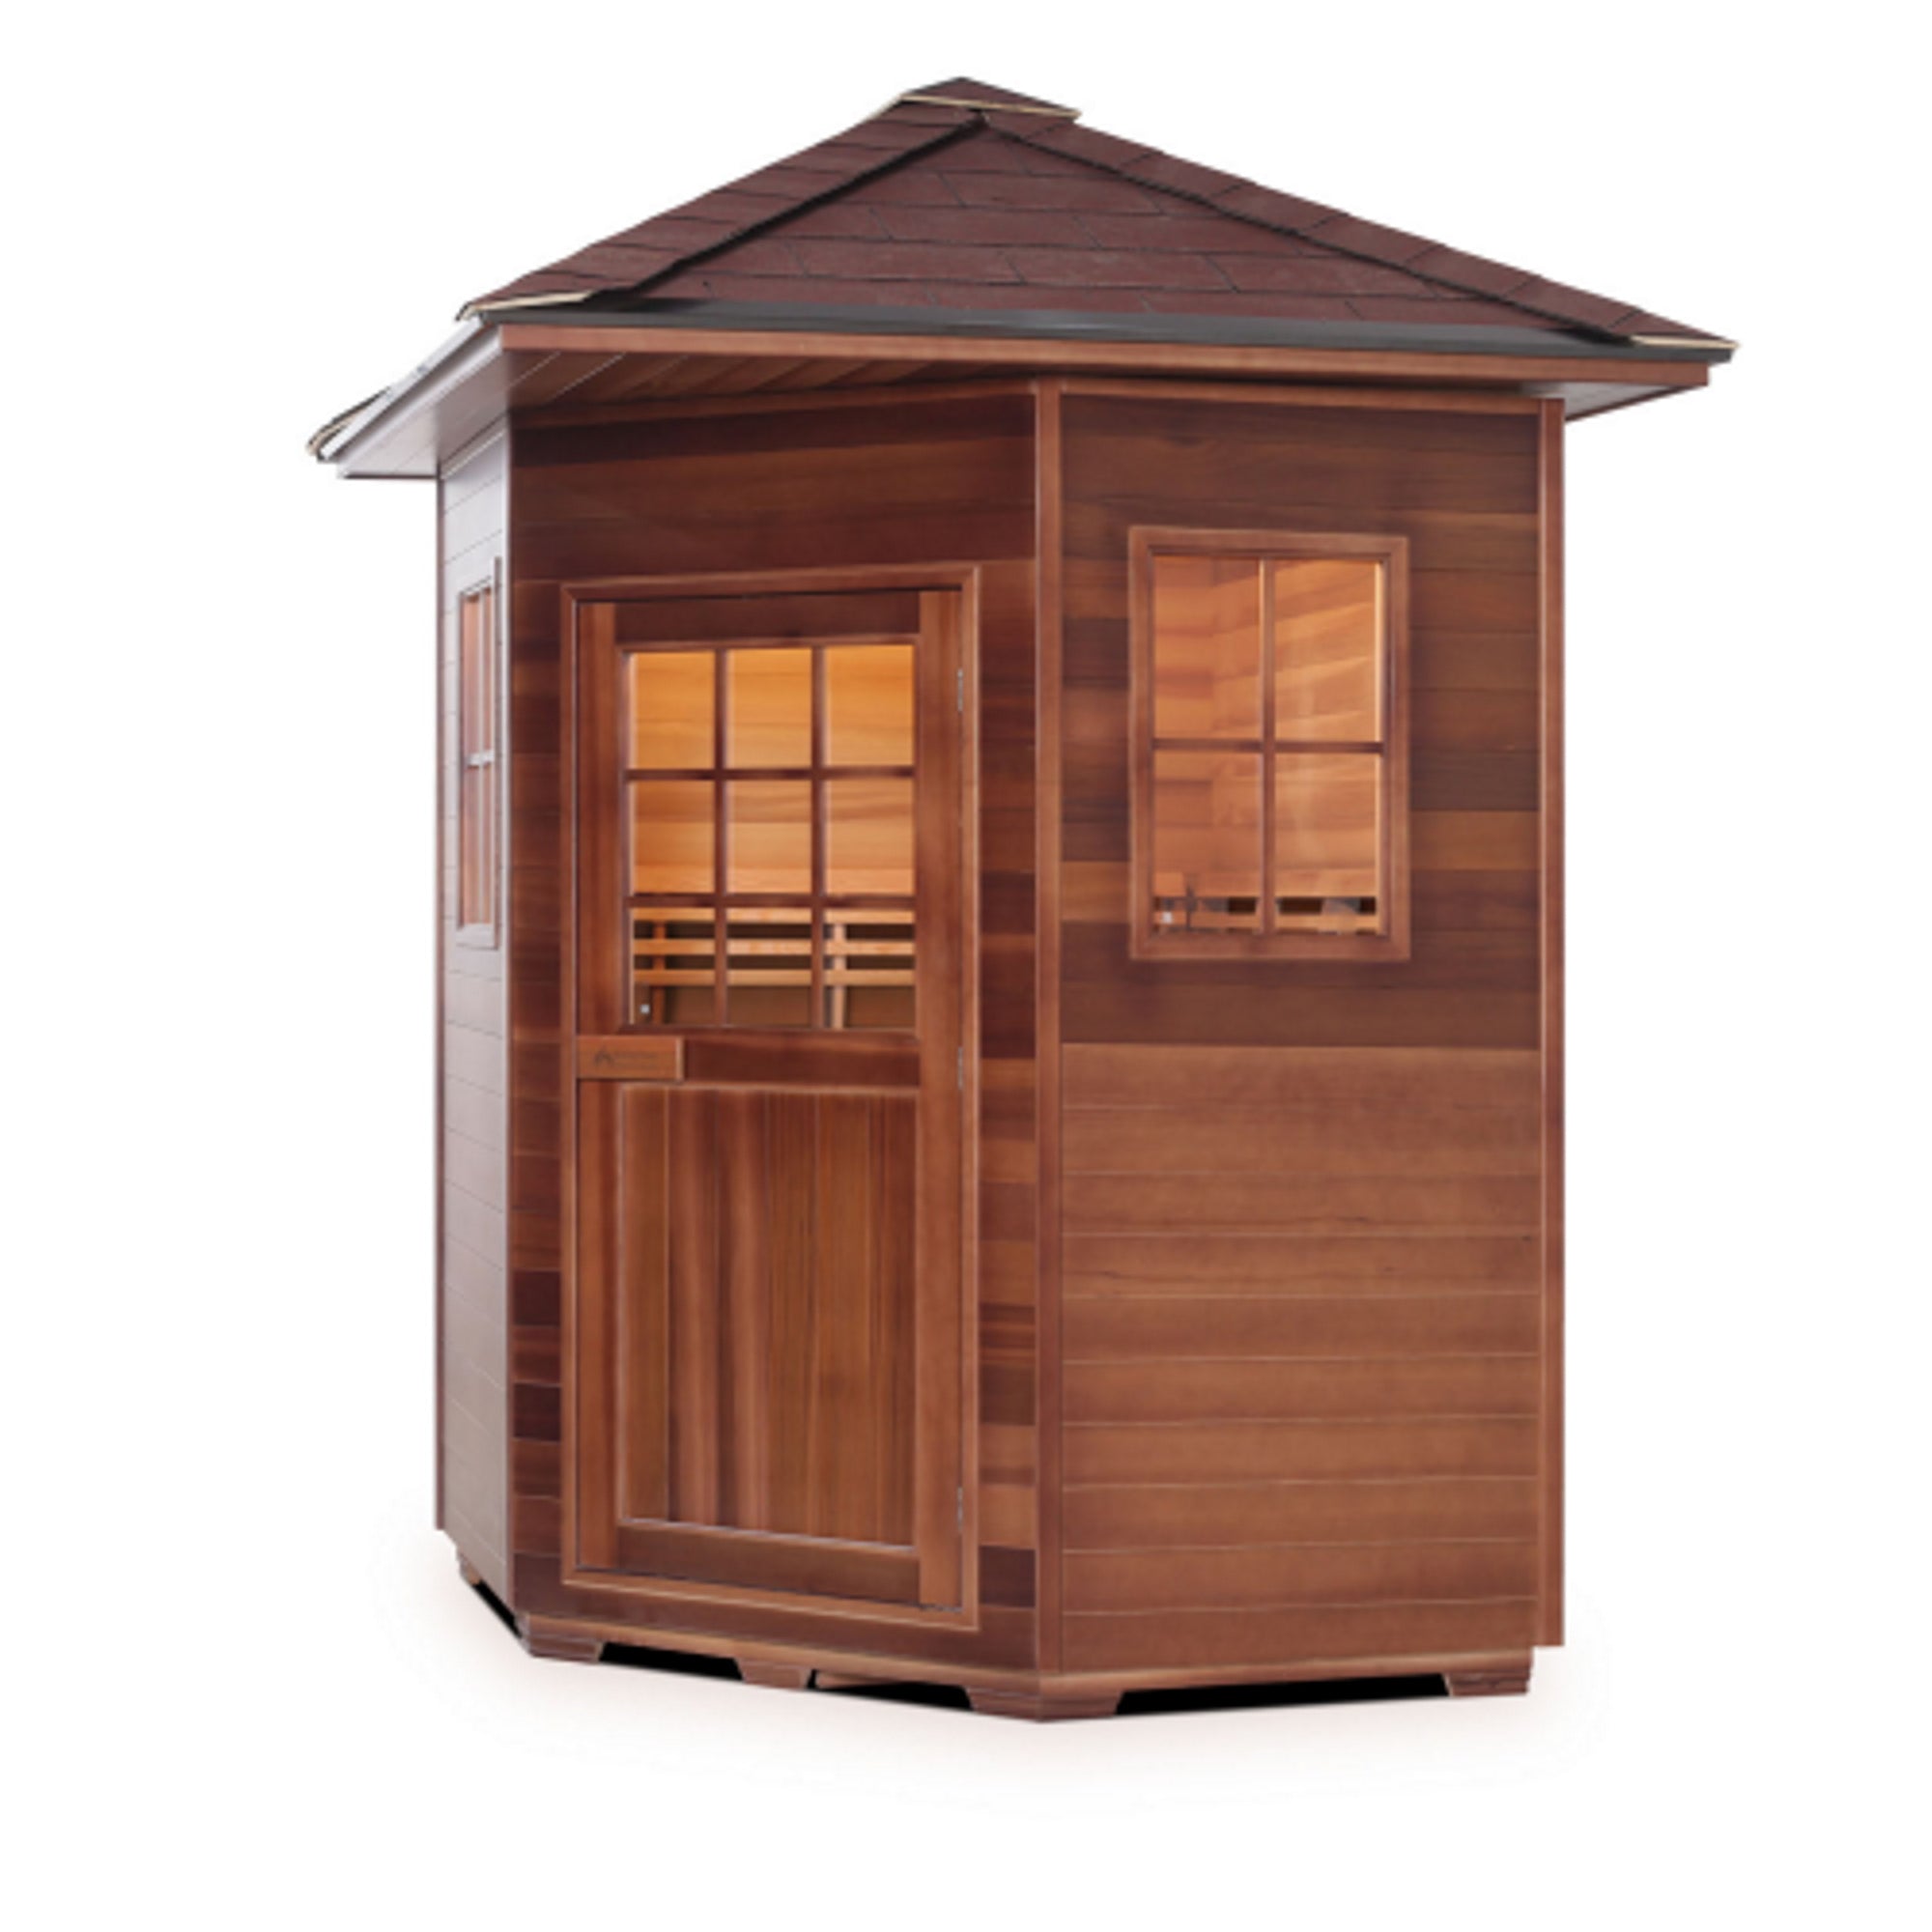 Enlighten Sauna Dry traditional Moonlight Outdoor Canadian Red Cedar Wood Outside And Inside Peak Roofed four person corner location sauna front view